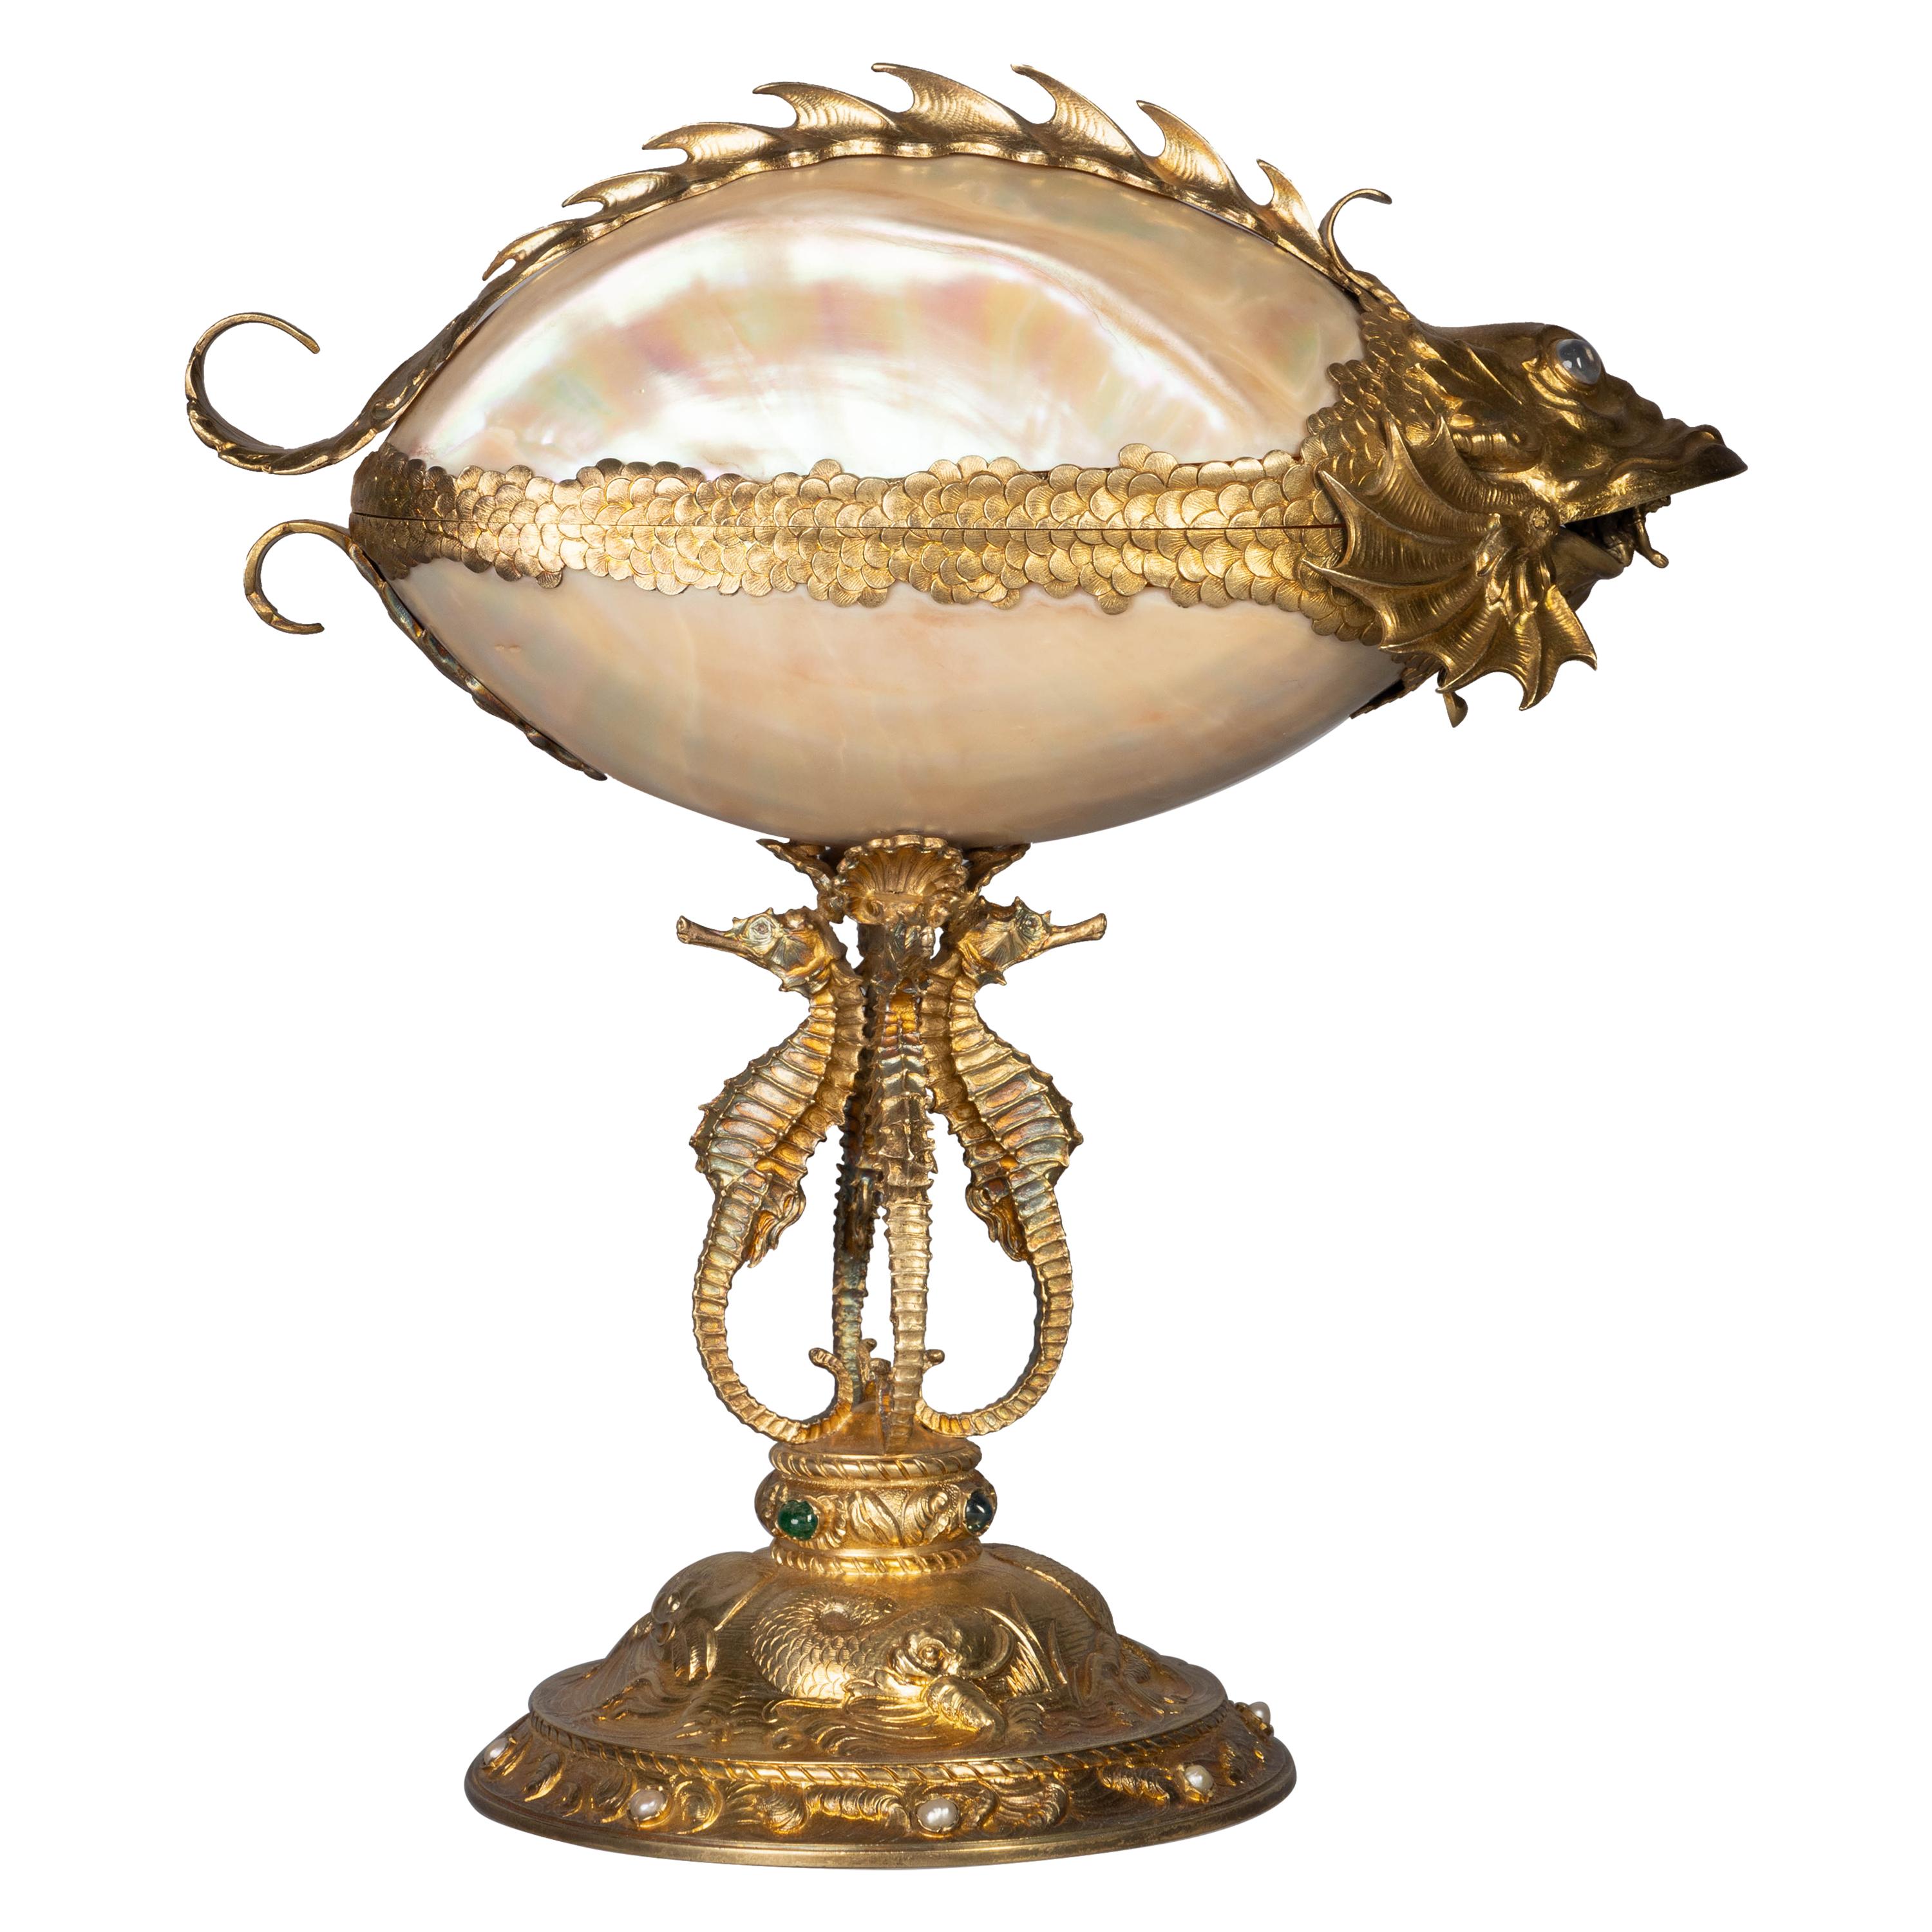 English Silver Gilt and Shell Casket